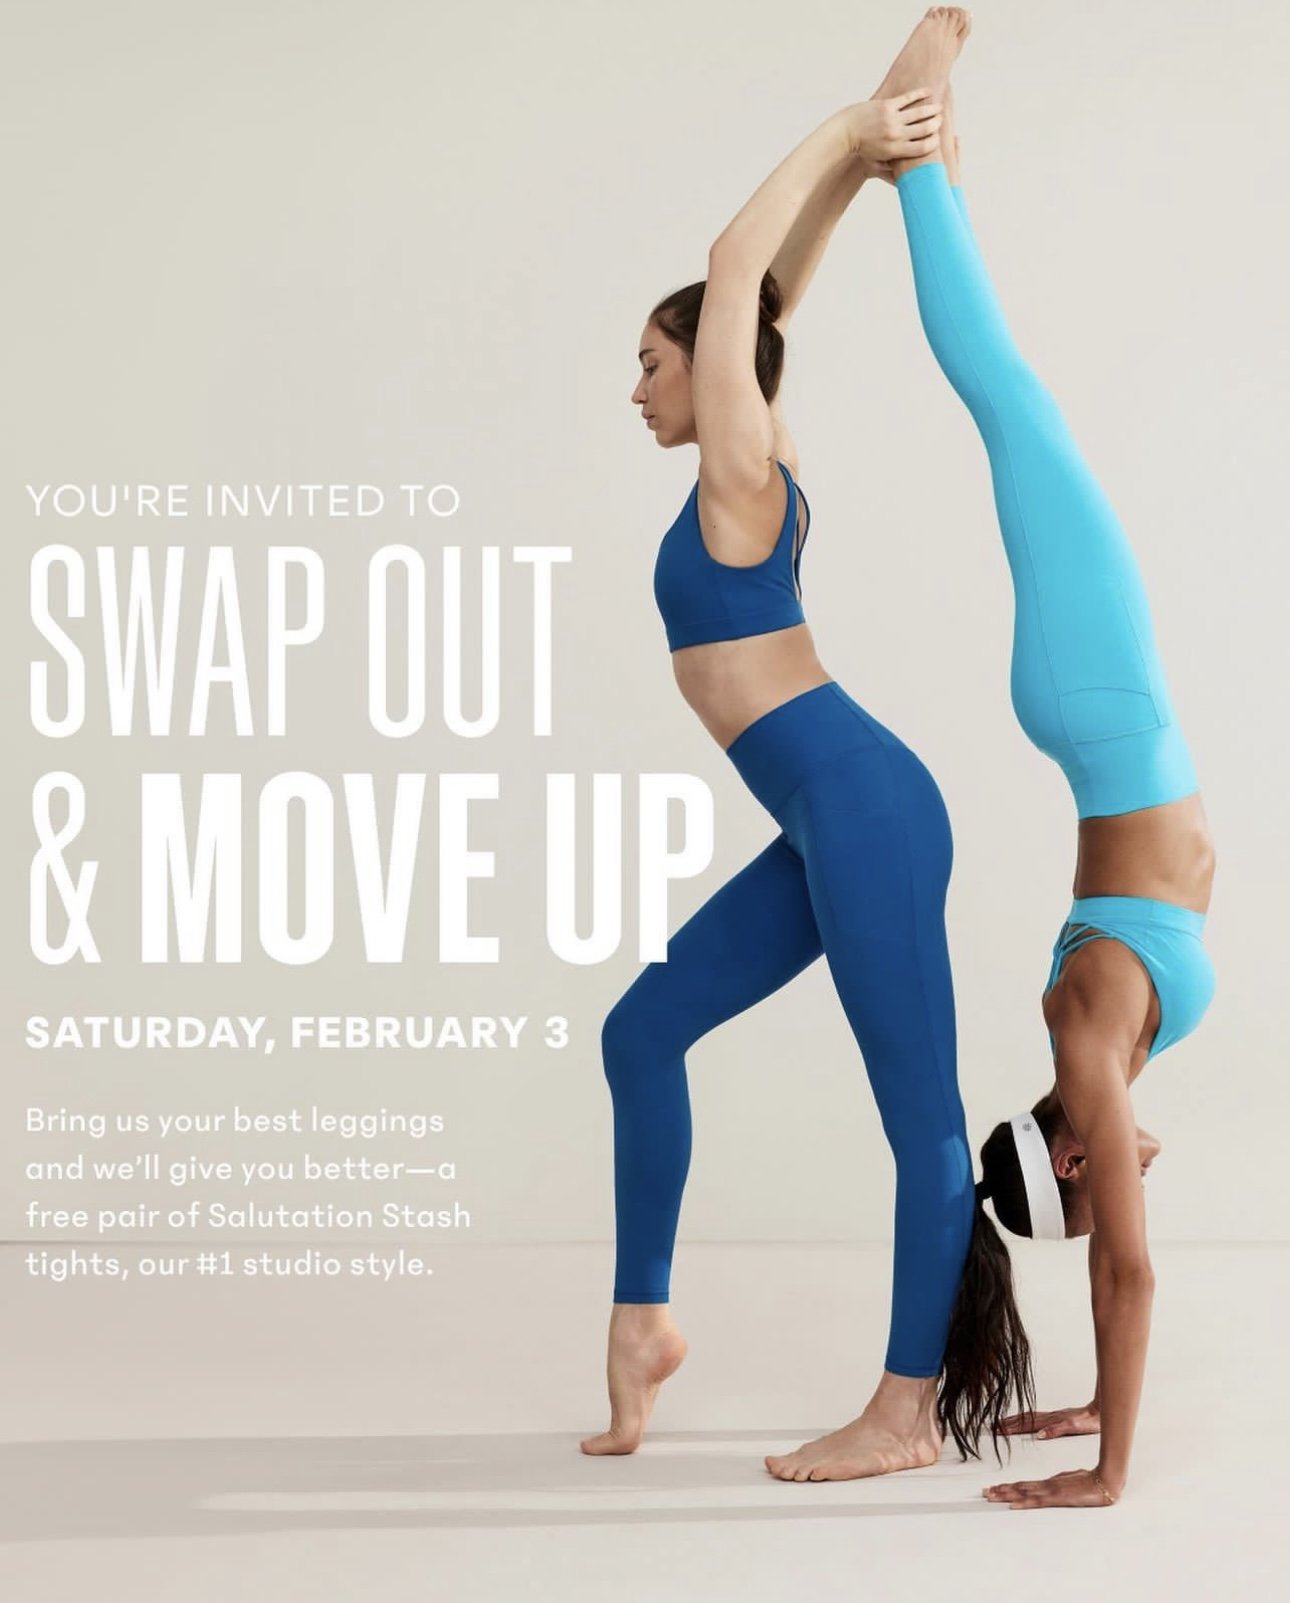 Athleta Swap Out & Move Up — NYC for FREE